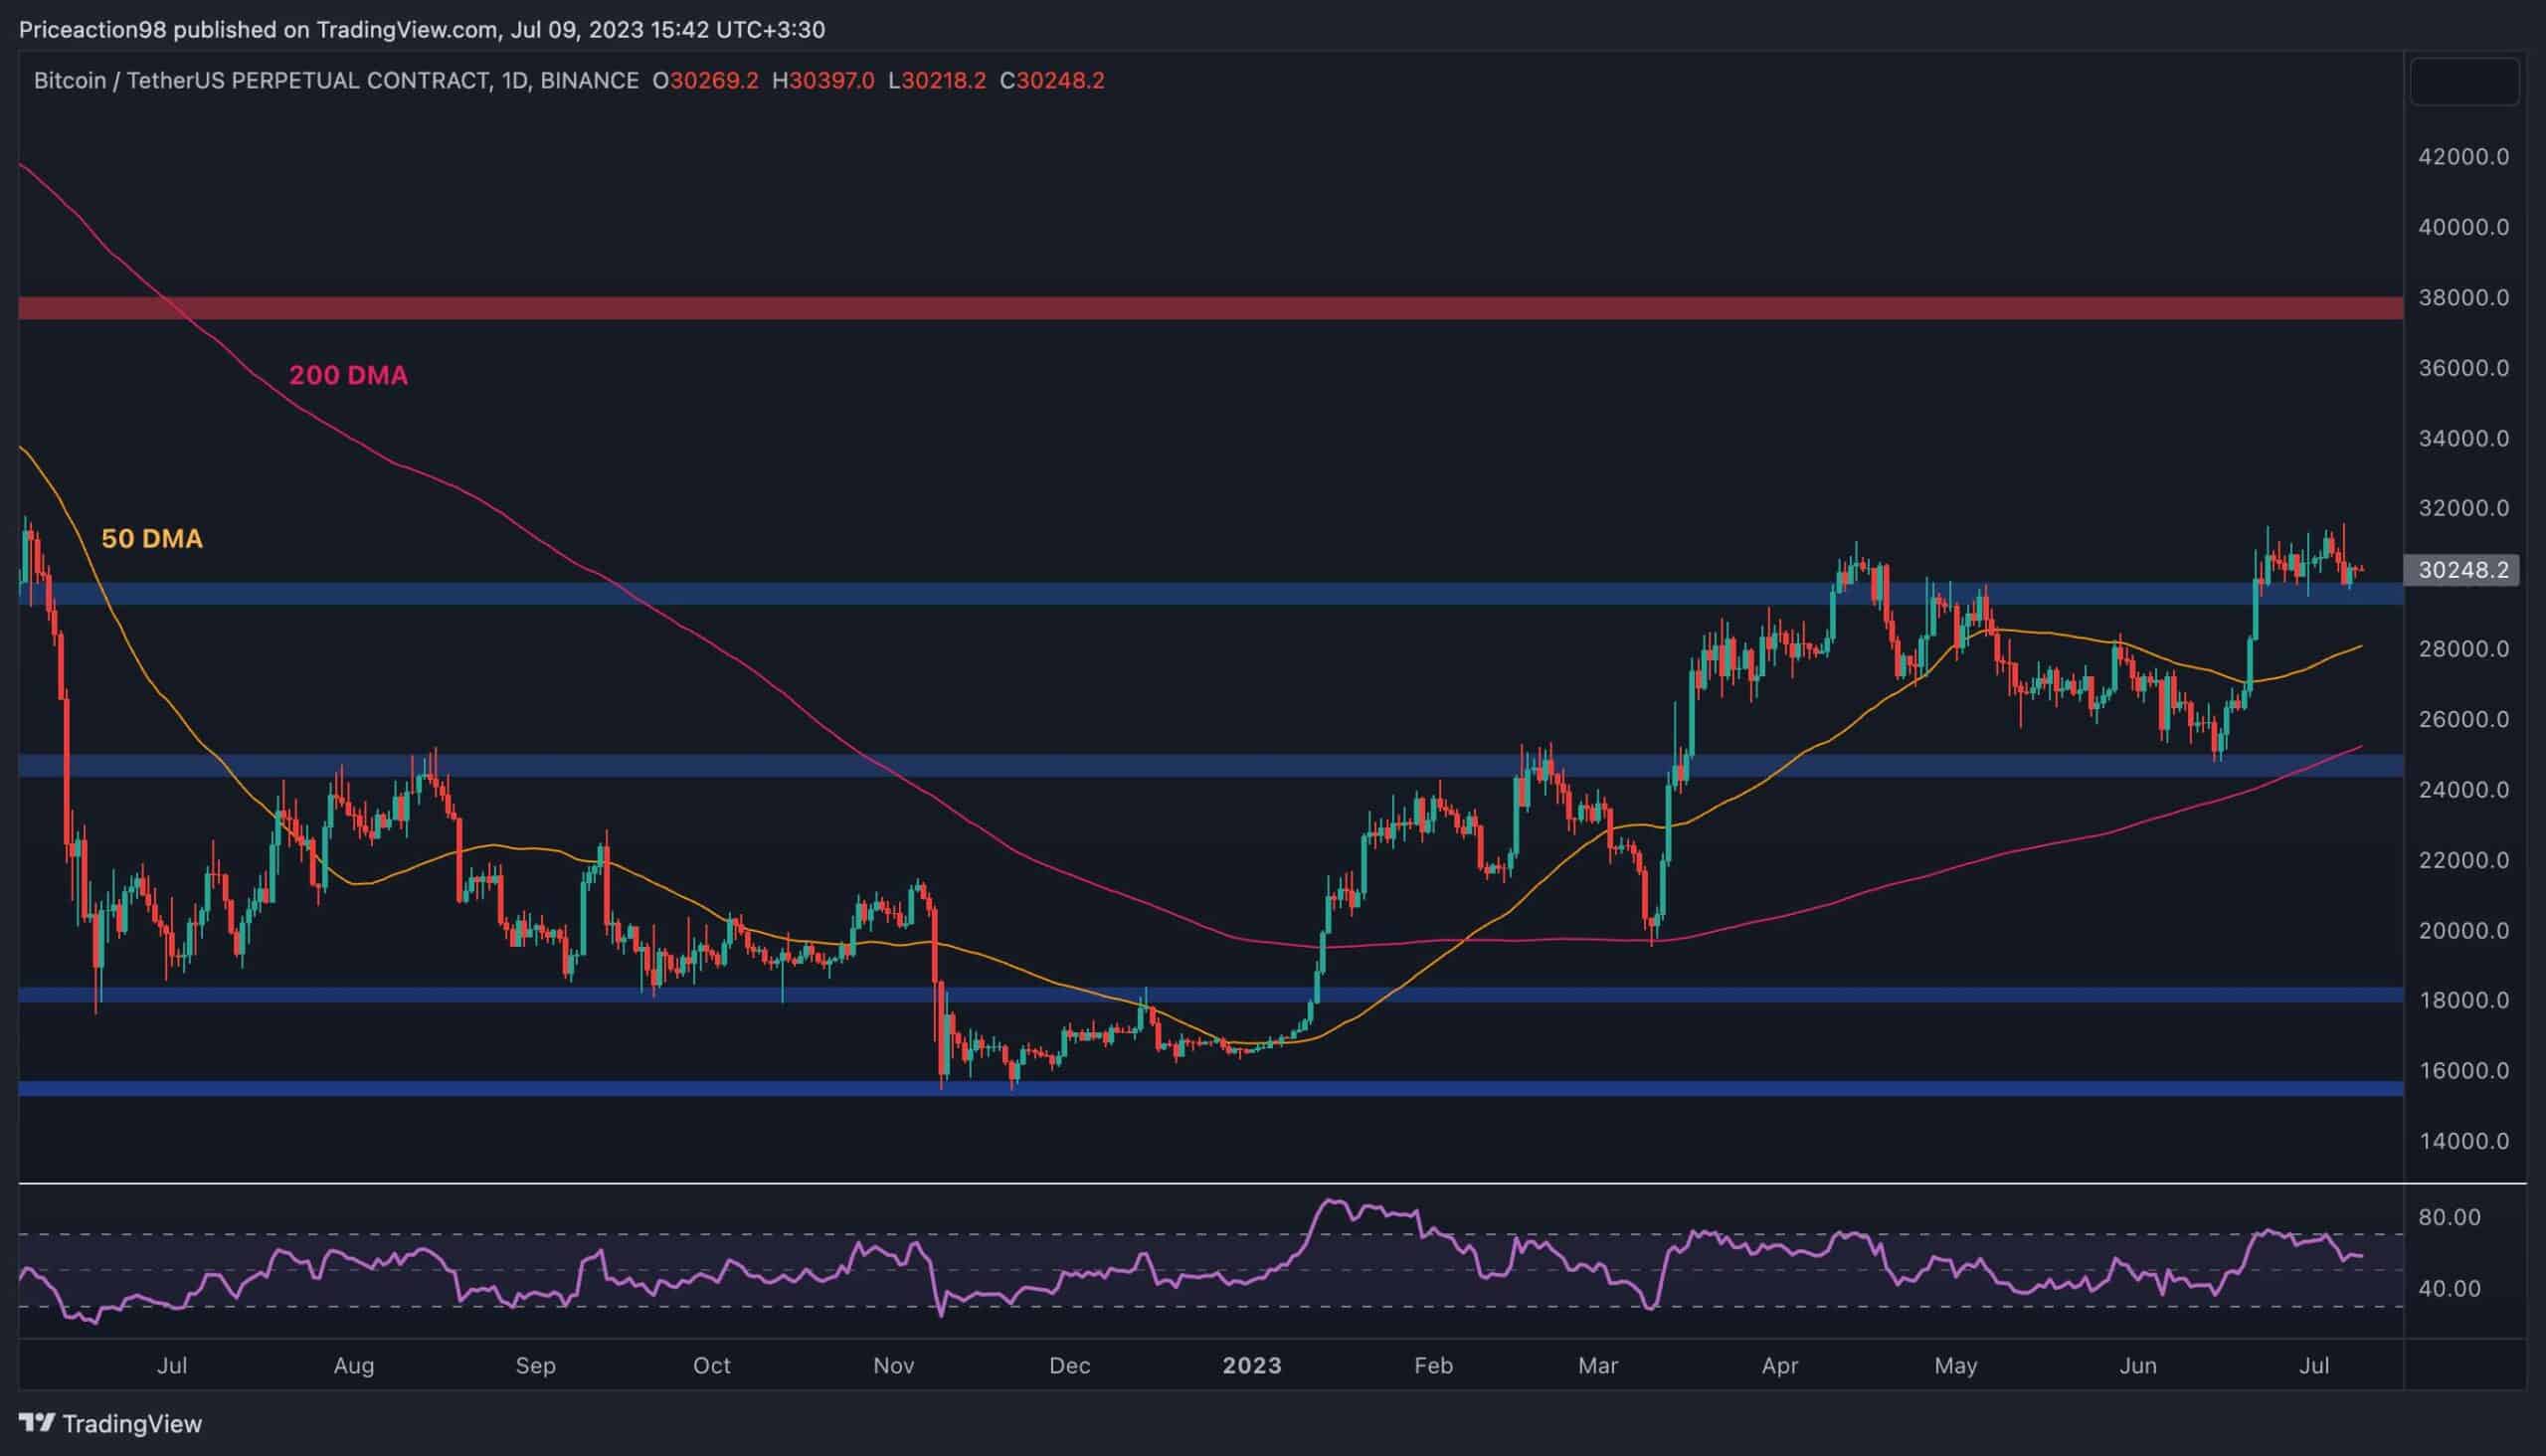 Will-bitcoin-plummet-below-$30k-or-are-the-bulls-staging-a-recovery?-(btc-price-analysis)